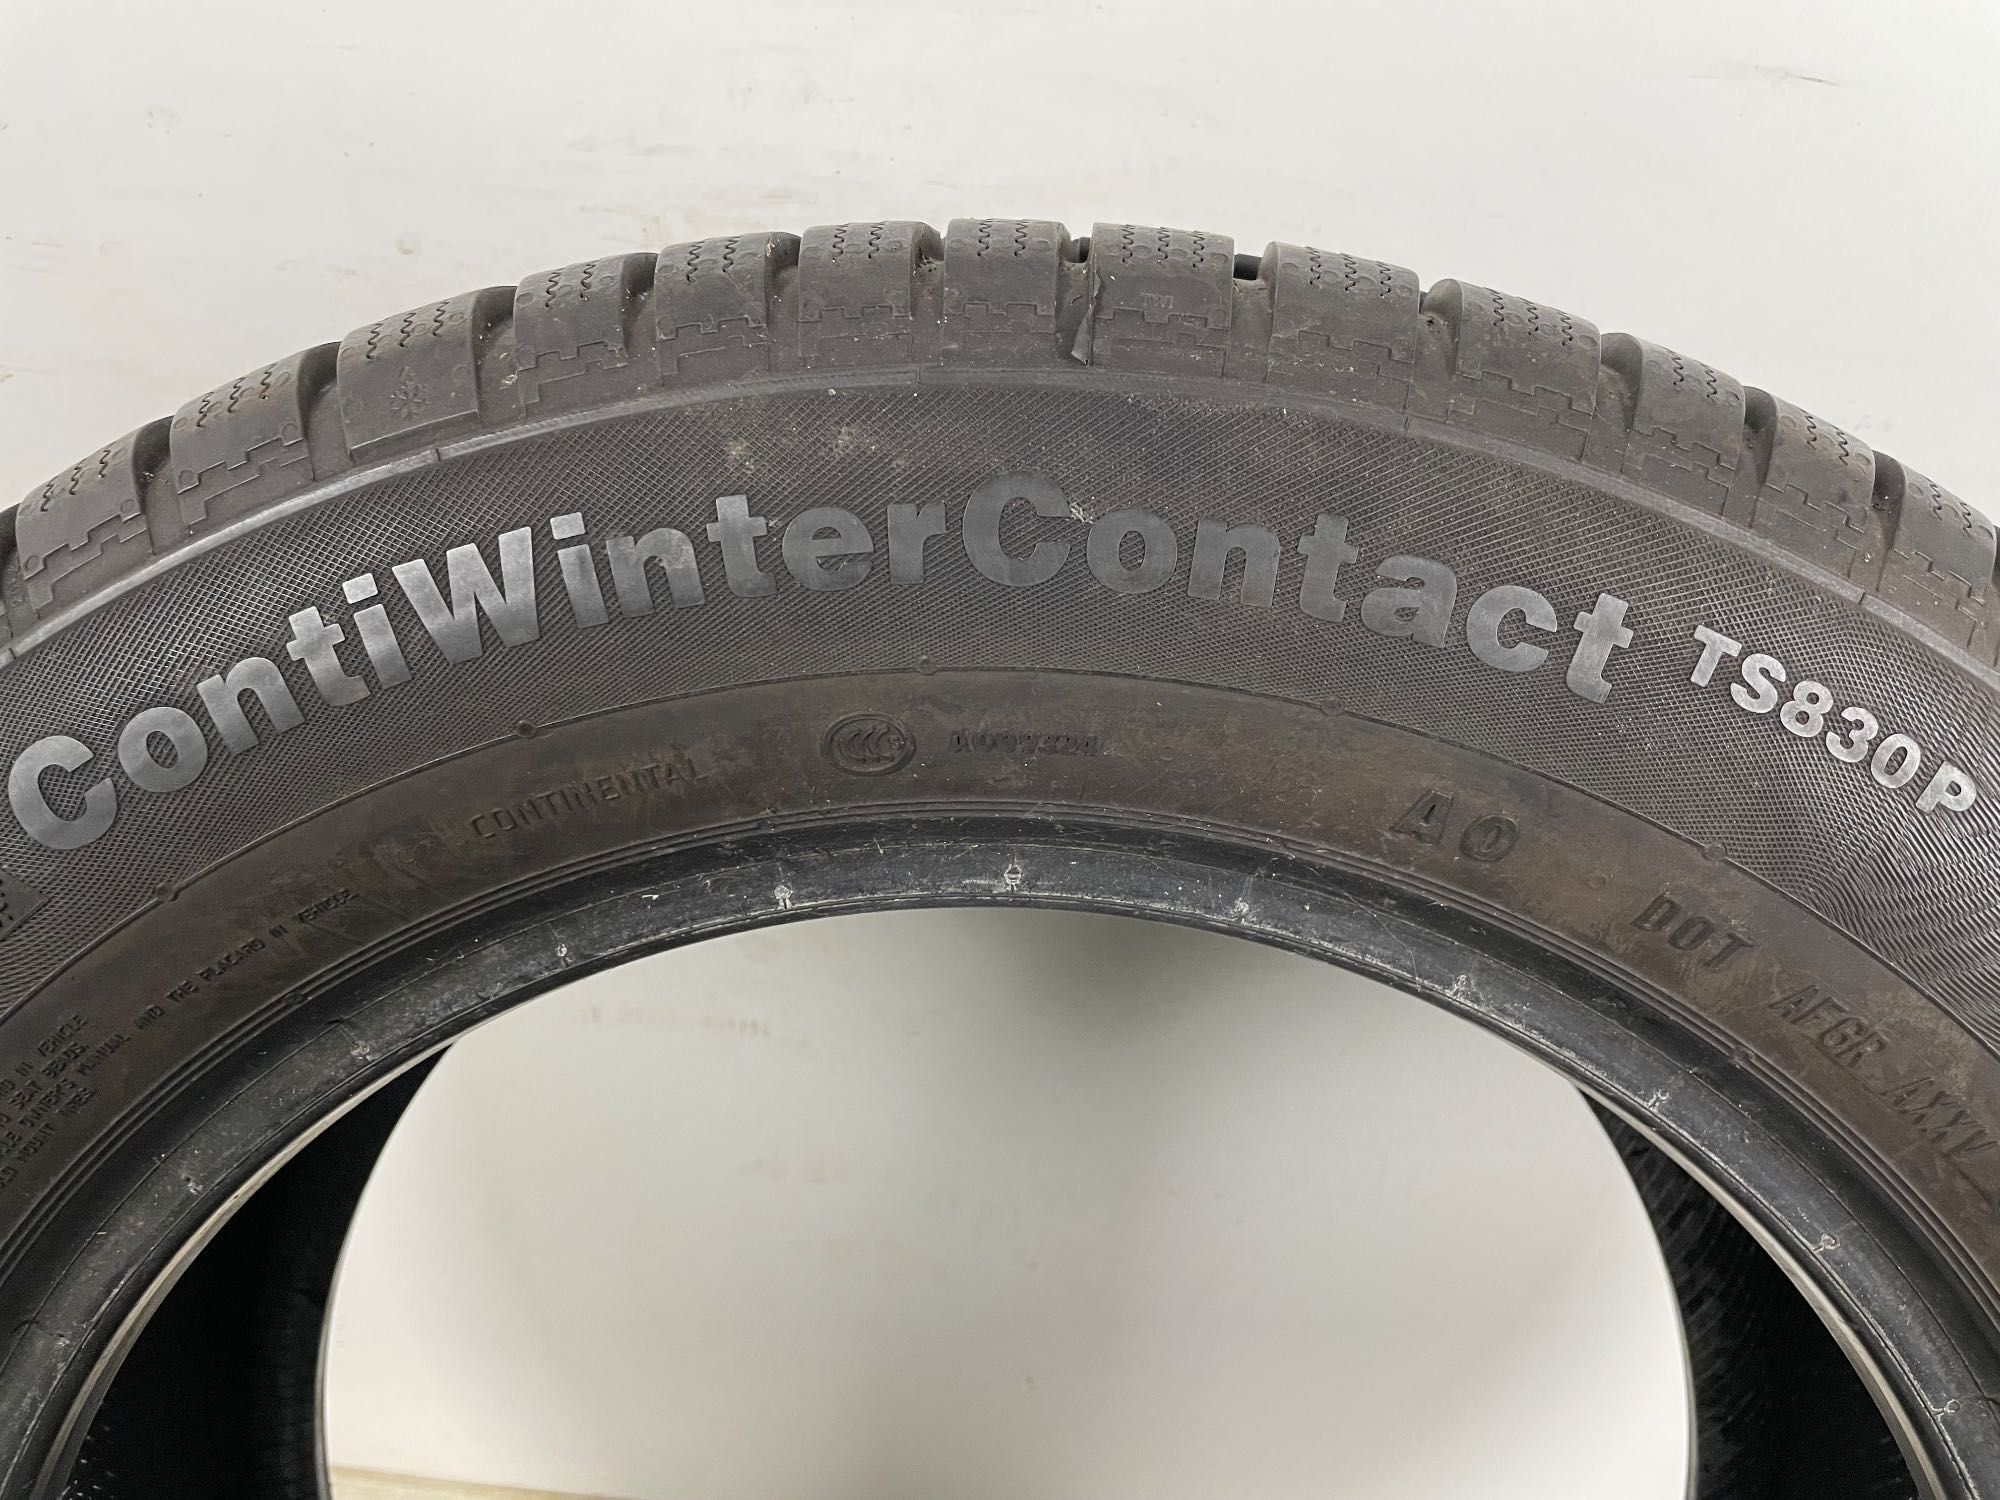 225/55R16 95H Continental ContiWinterContact TS830P